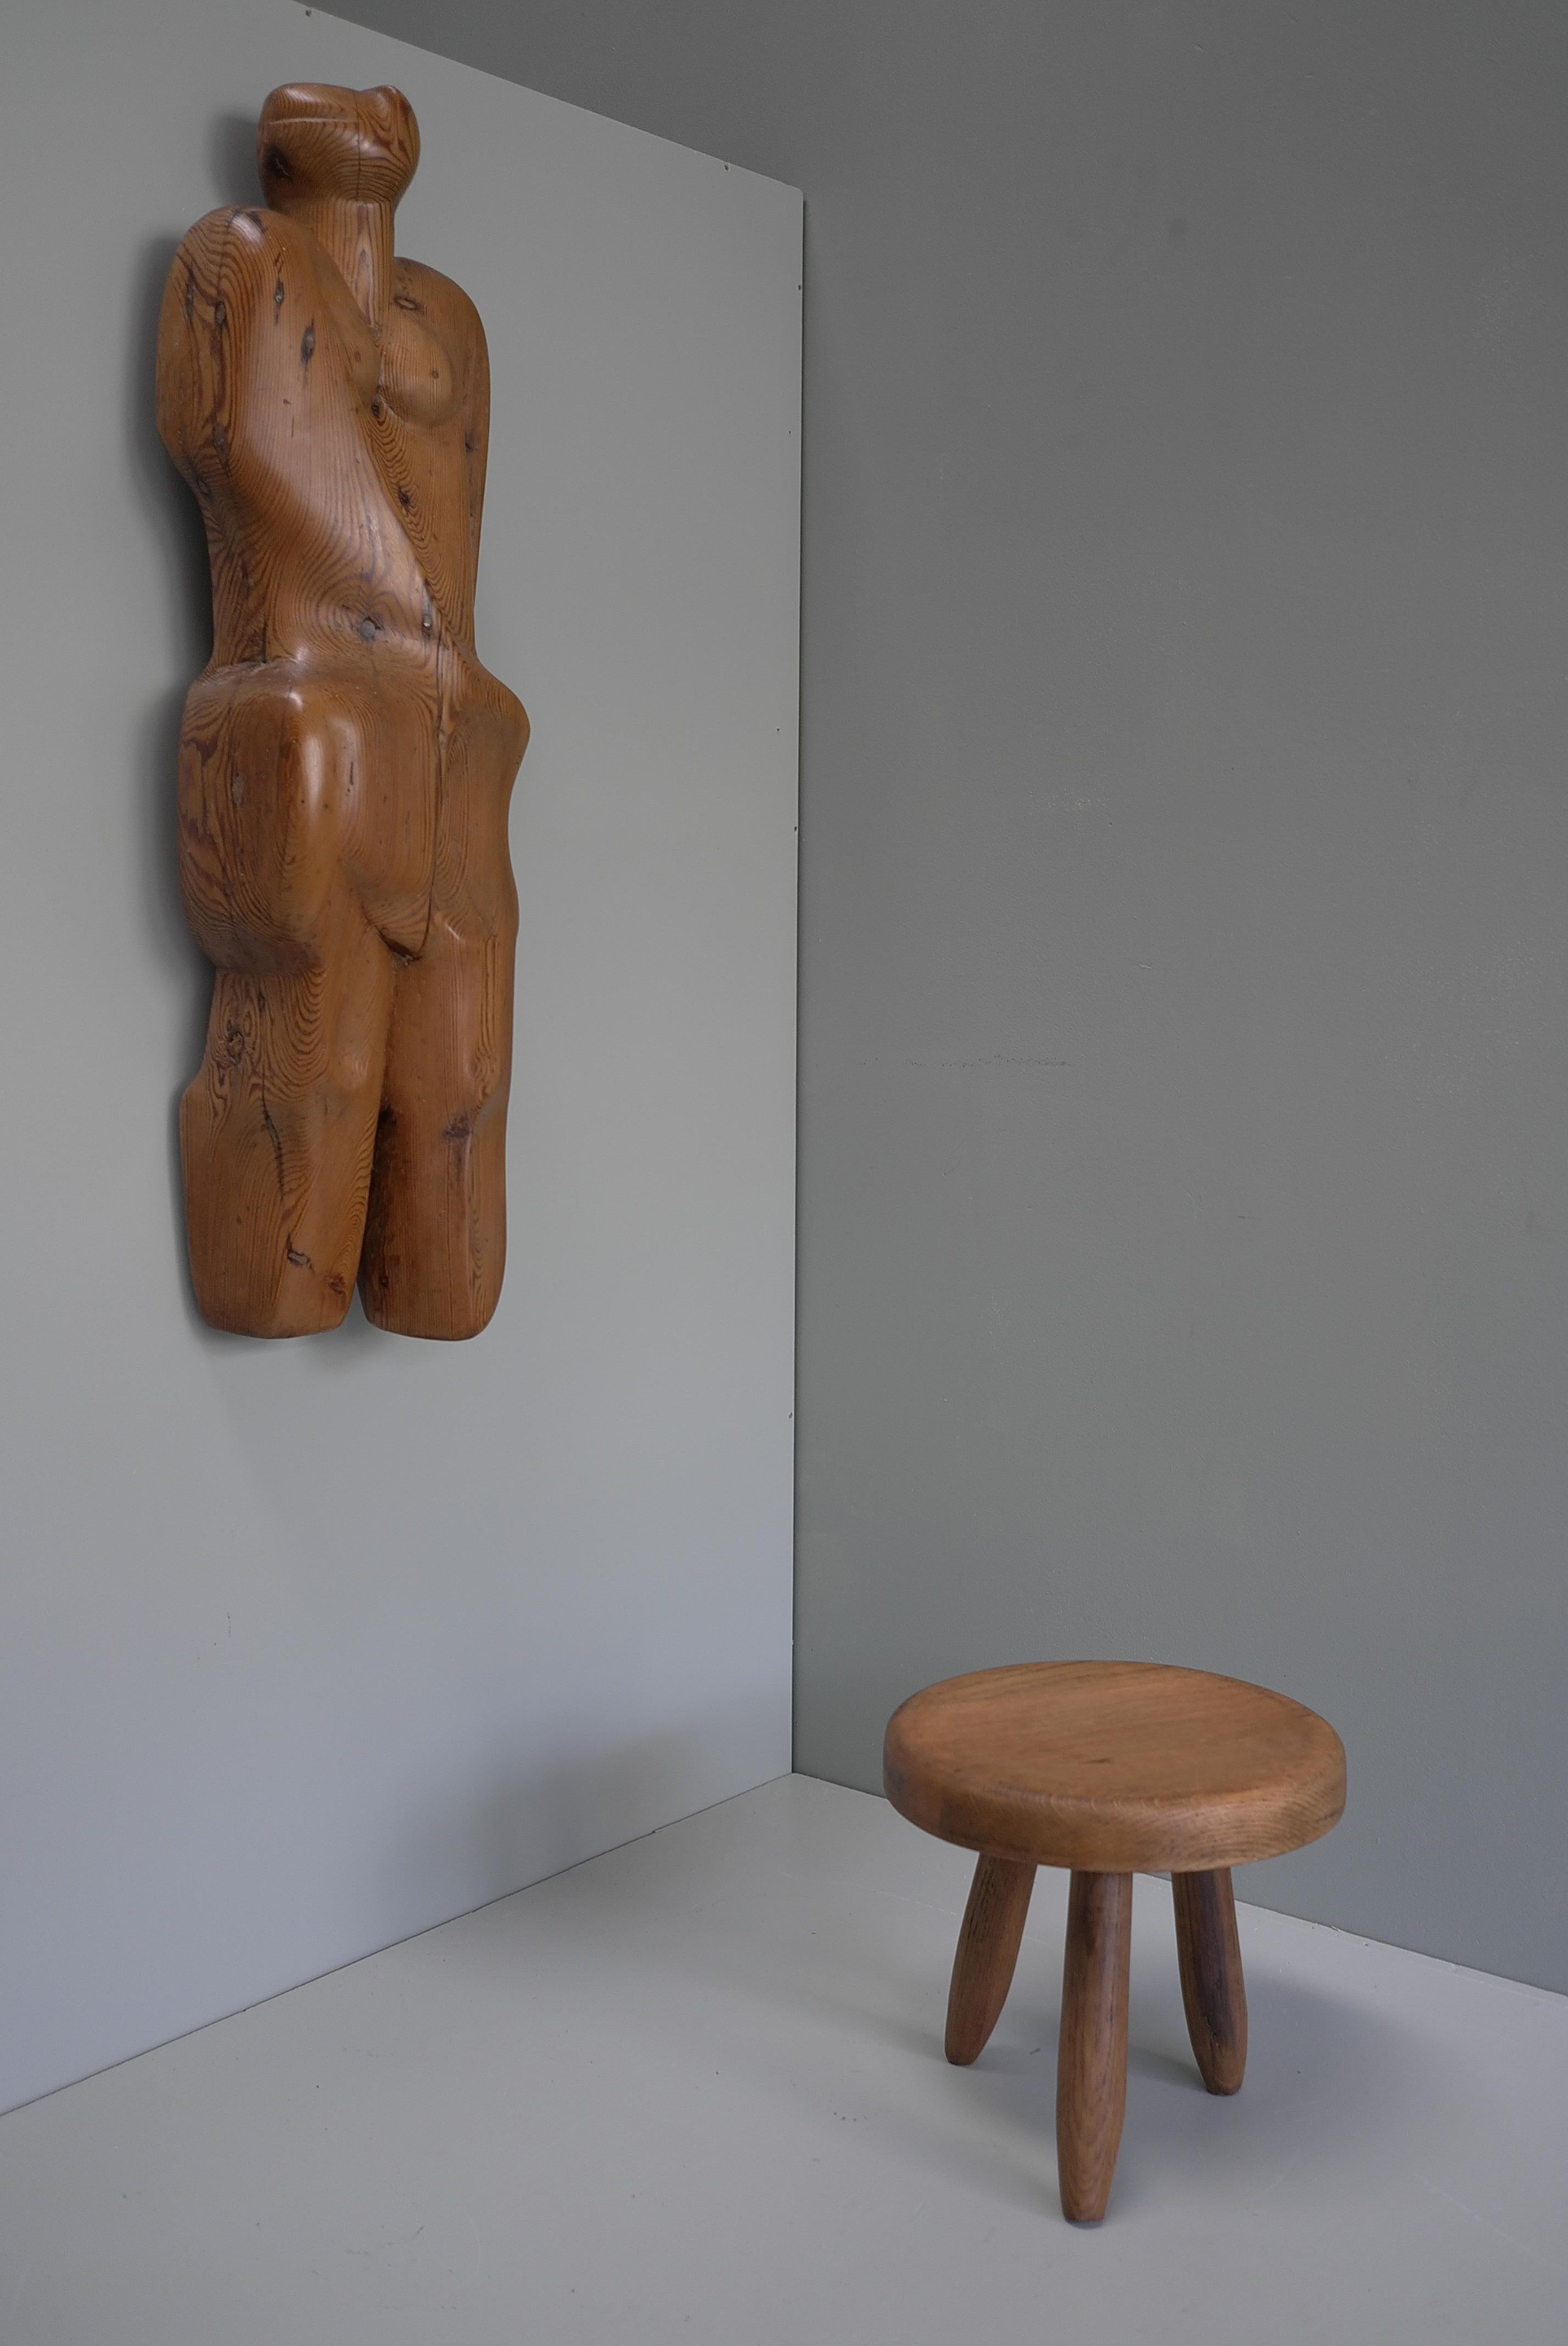 Abstract Wooden Wall Art , Women Figure by Cor Dam, Delft The Netherlands 1958 For Sale 5